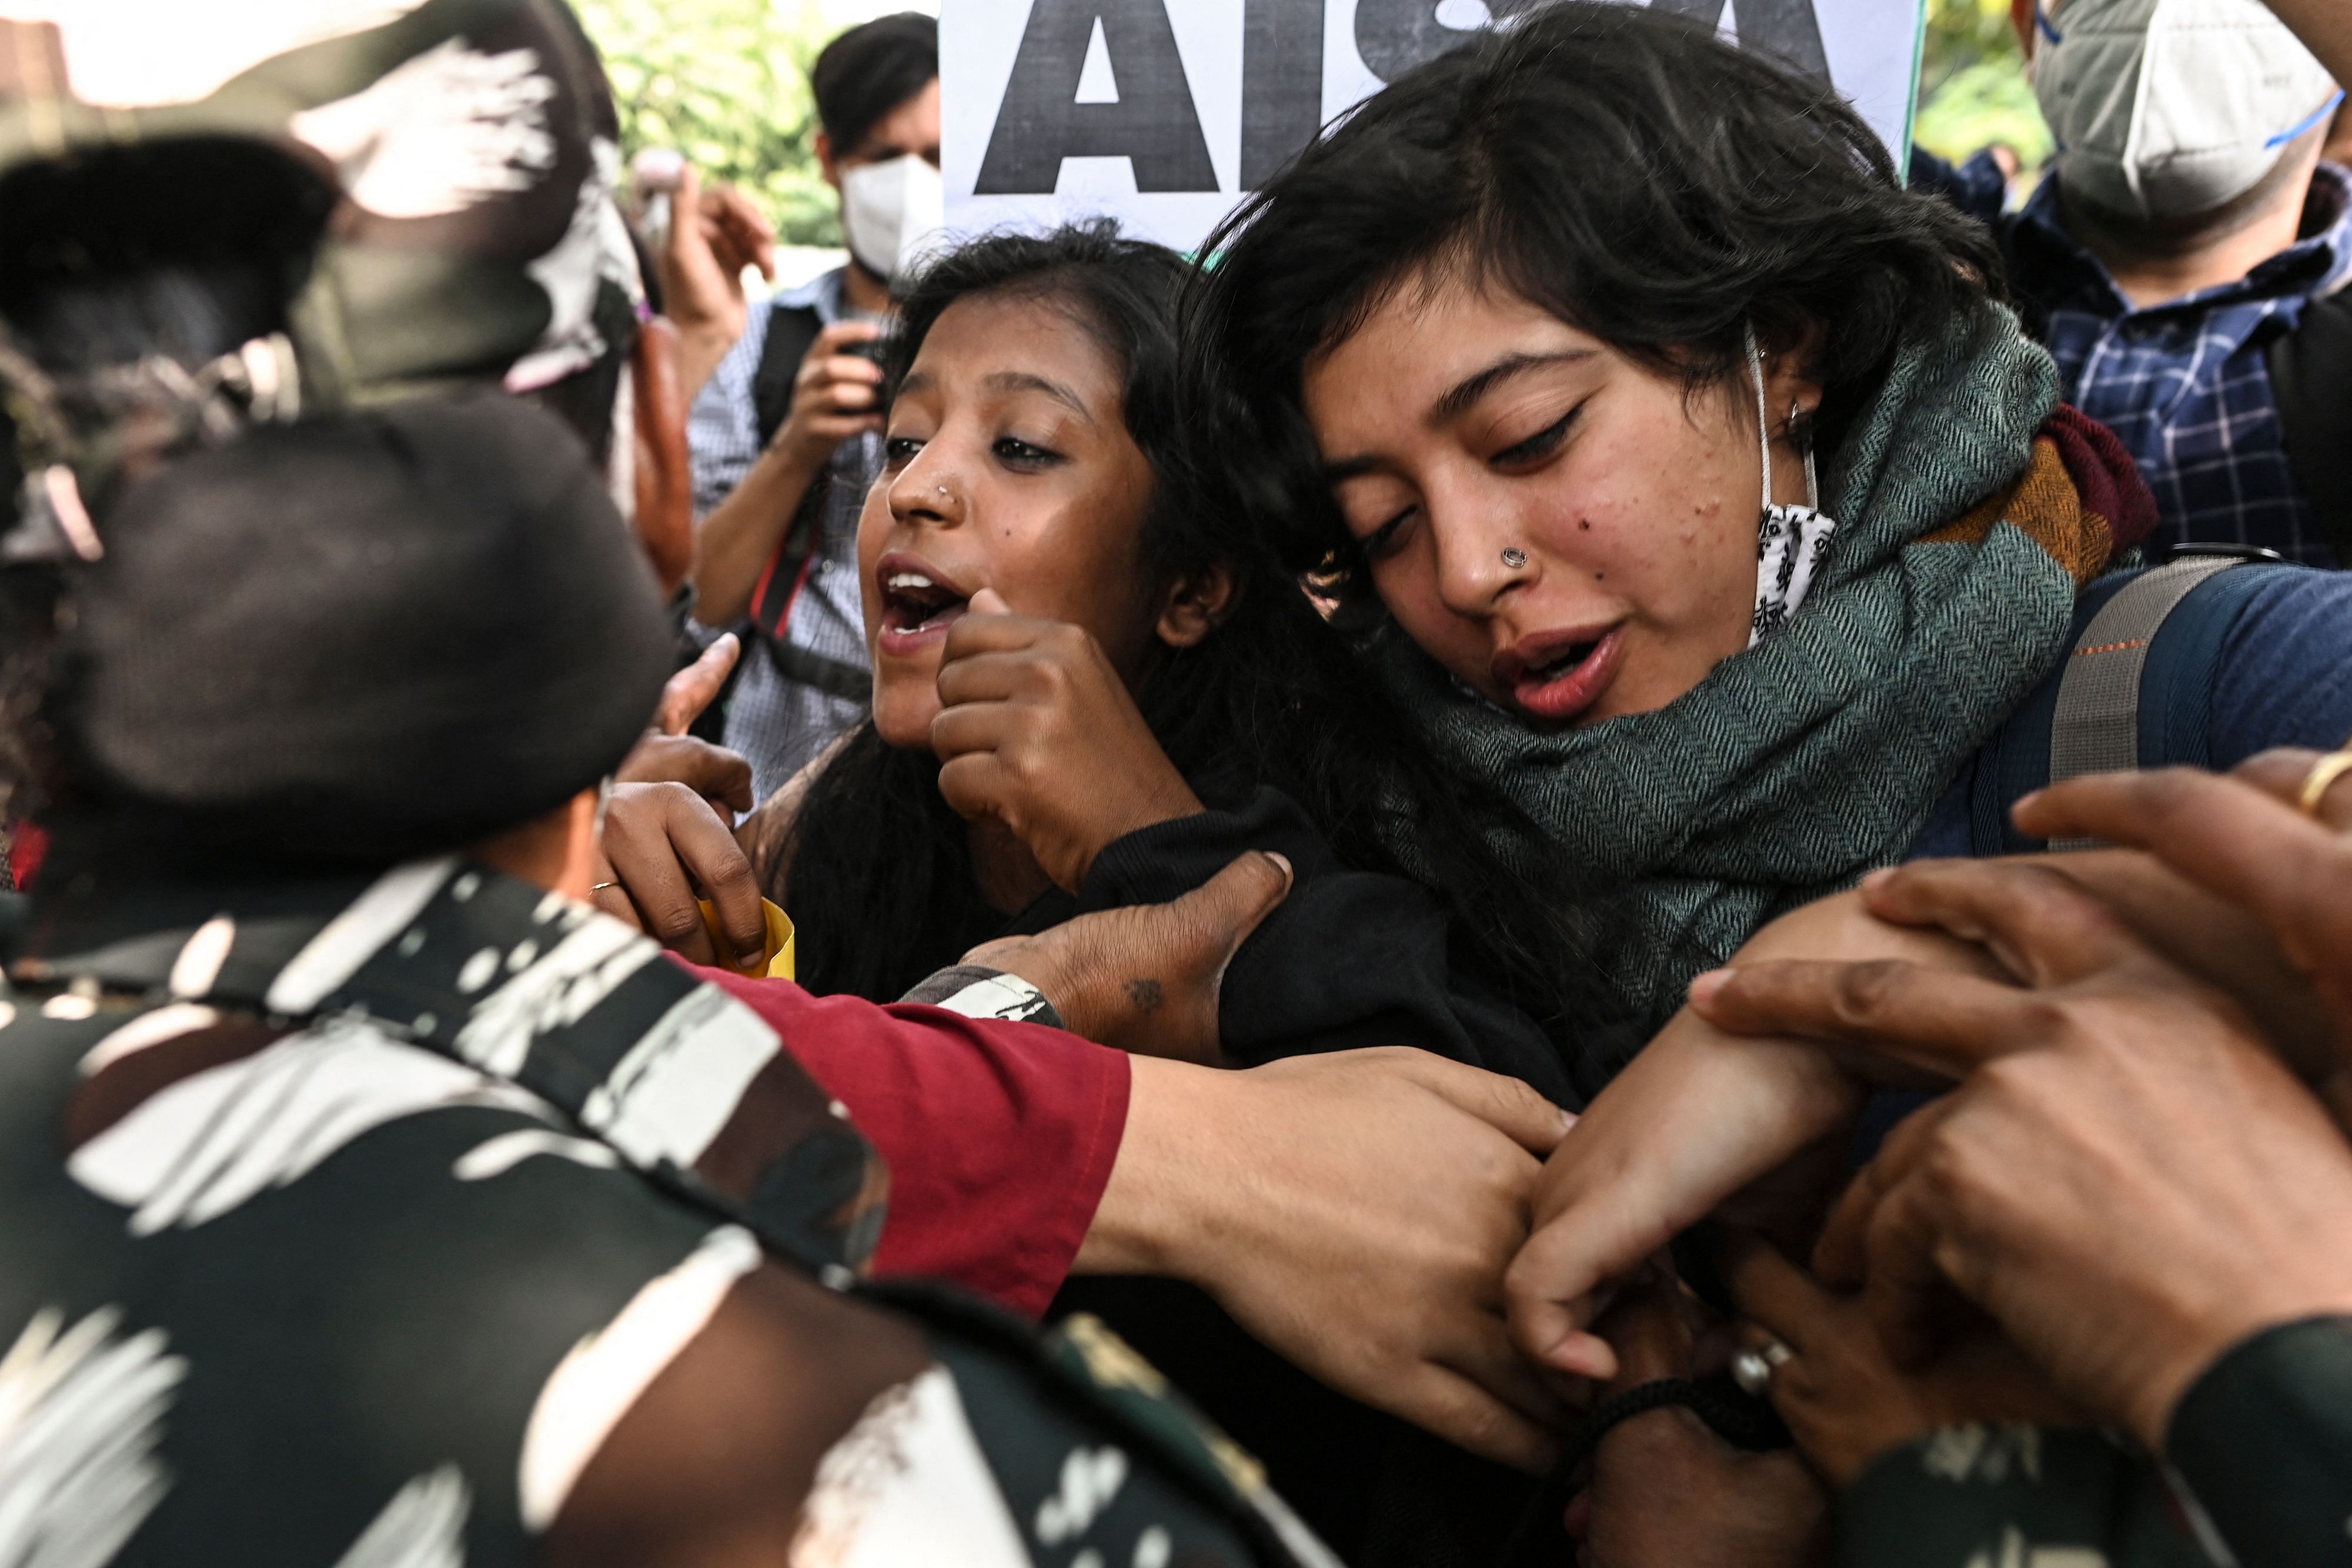 Police personnel stop demonstrators as they try to cross police barricades during a protest against the arrest of climate change activist Disha Ravi by Delhi police for allegedly helping to create a guide for anti-government farmers protests shared by environmentalist Greta Thunberg, outside the Delhi Police headquarters, in New Delhi on February 16, 2021. Credit: AFP Photo